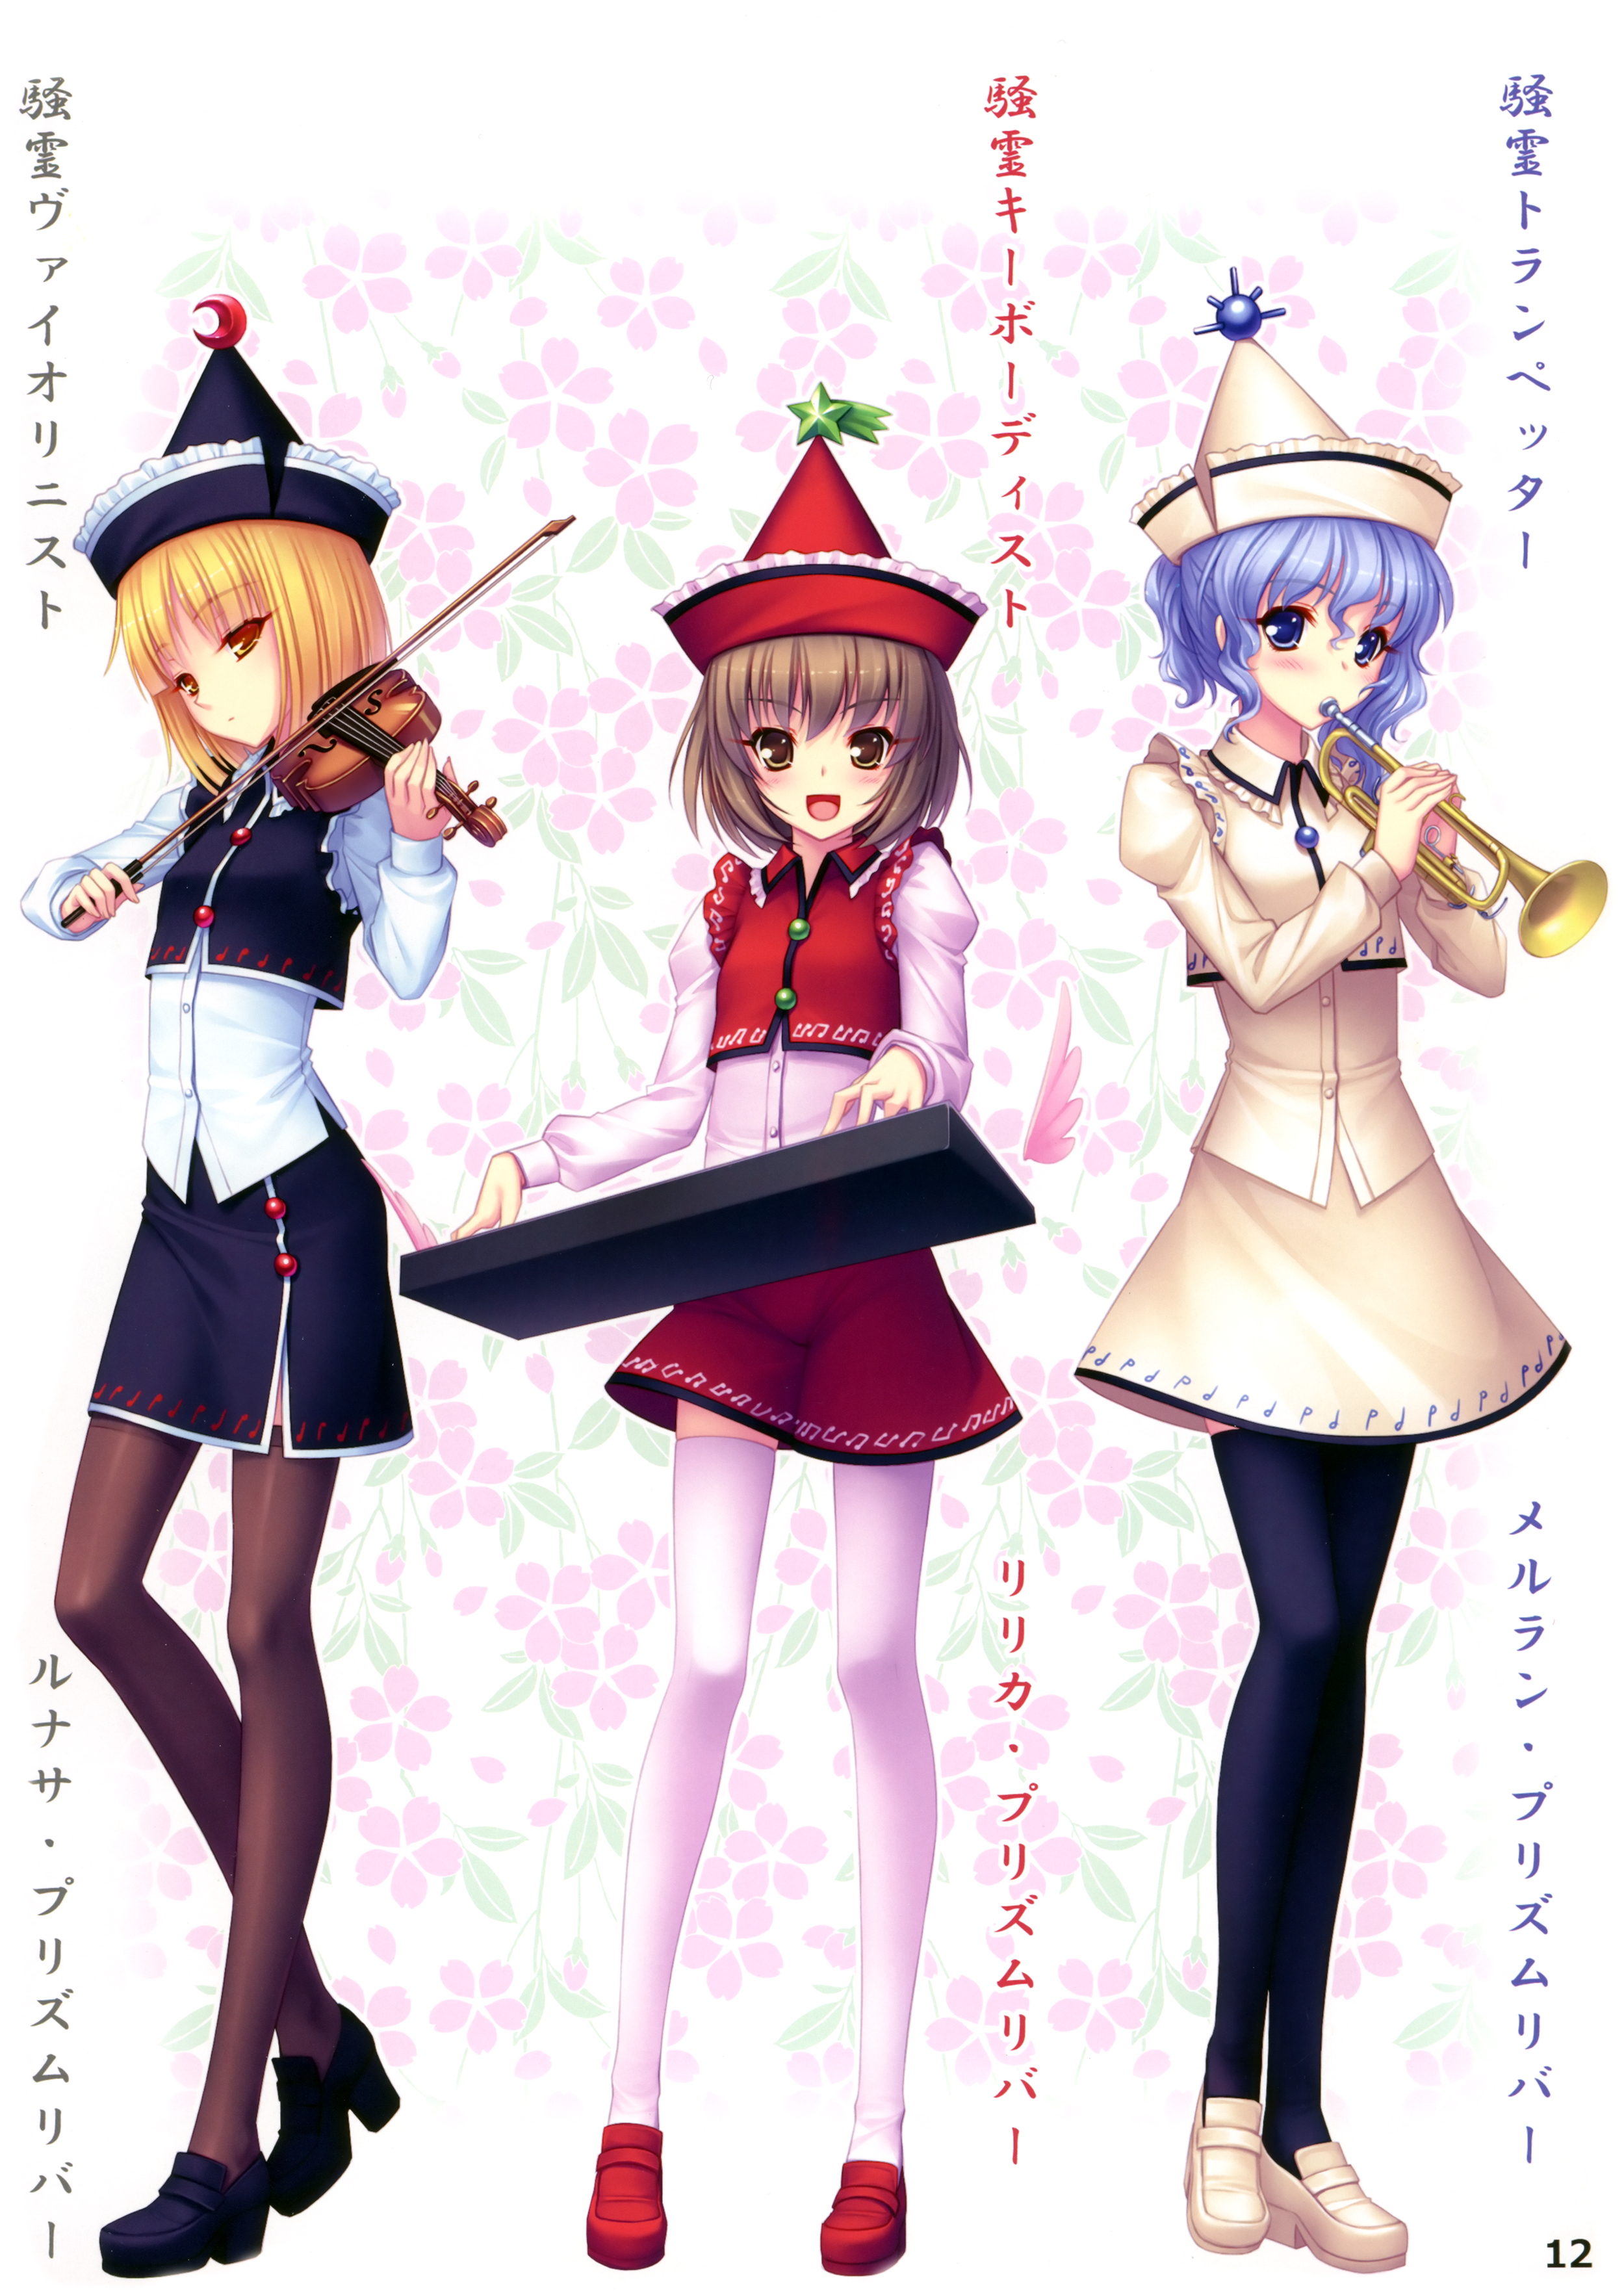 brunettes, blondes, video games, Touhou, music, flowers, text, blue eyes, keyboards, skirts, Japanese, brown eyes, blue hair, violins, short hair, thigh highs, yellow eyes, instruments, trumpets, smiling, blush, sisters, open mouth, kanji, vertical, hats, - desktop wallpaper